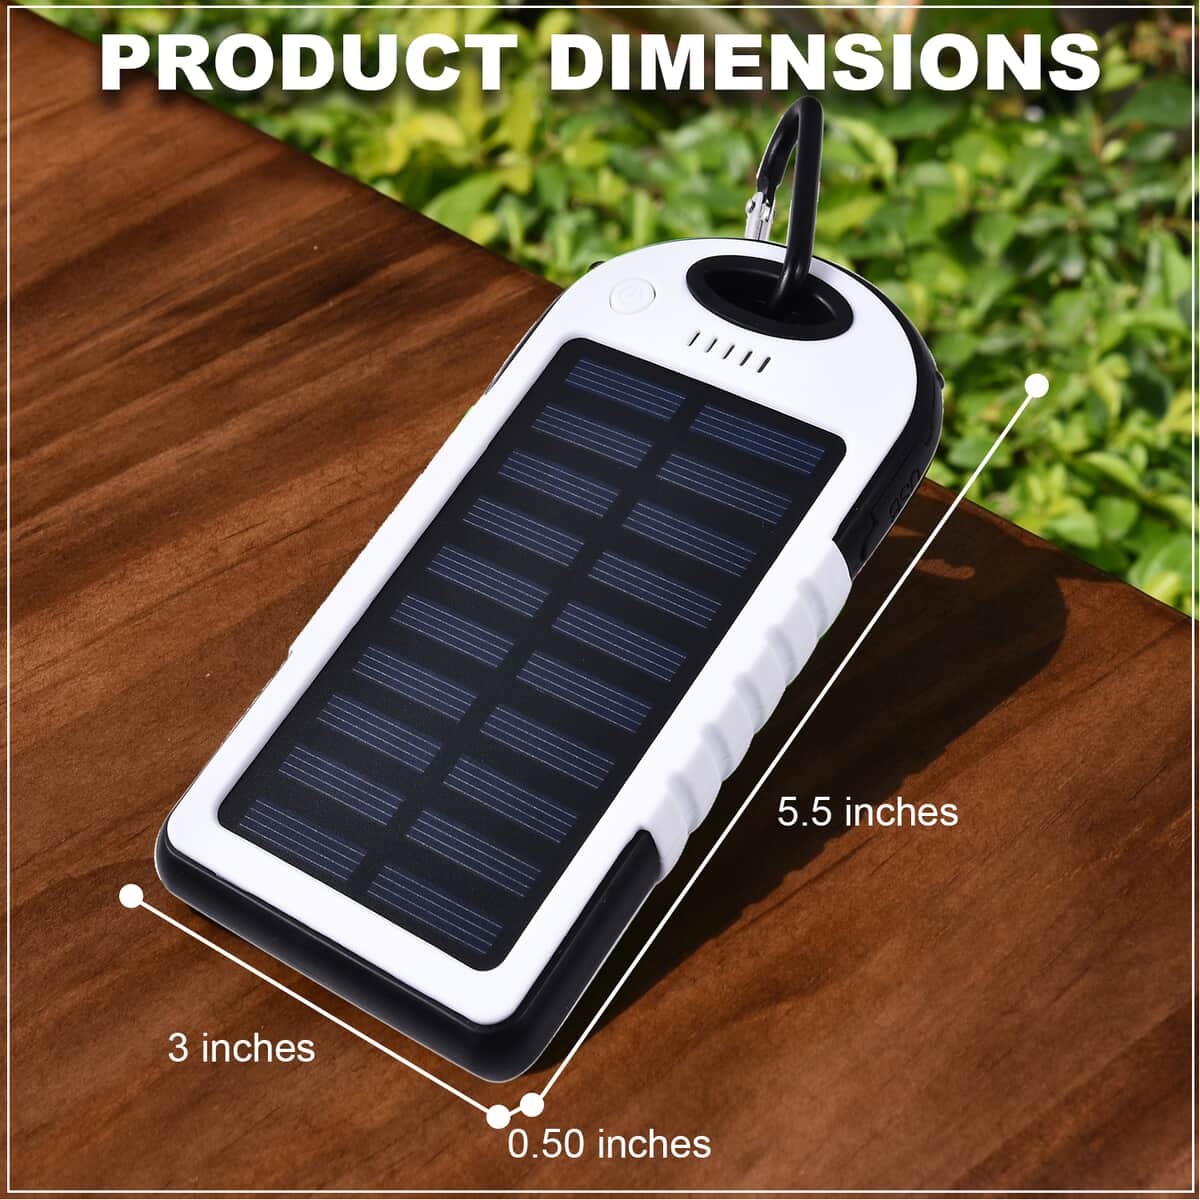 Homesmart White Carabiner Solar 5000 mAh Battery Charger with USB & Emergency LED Flash Light image number 3